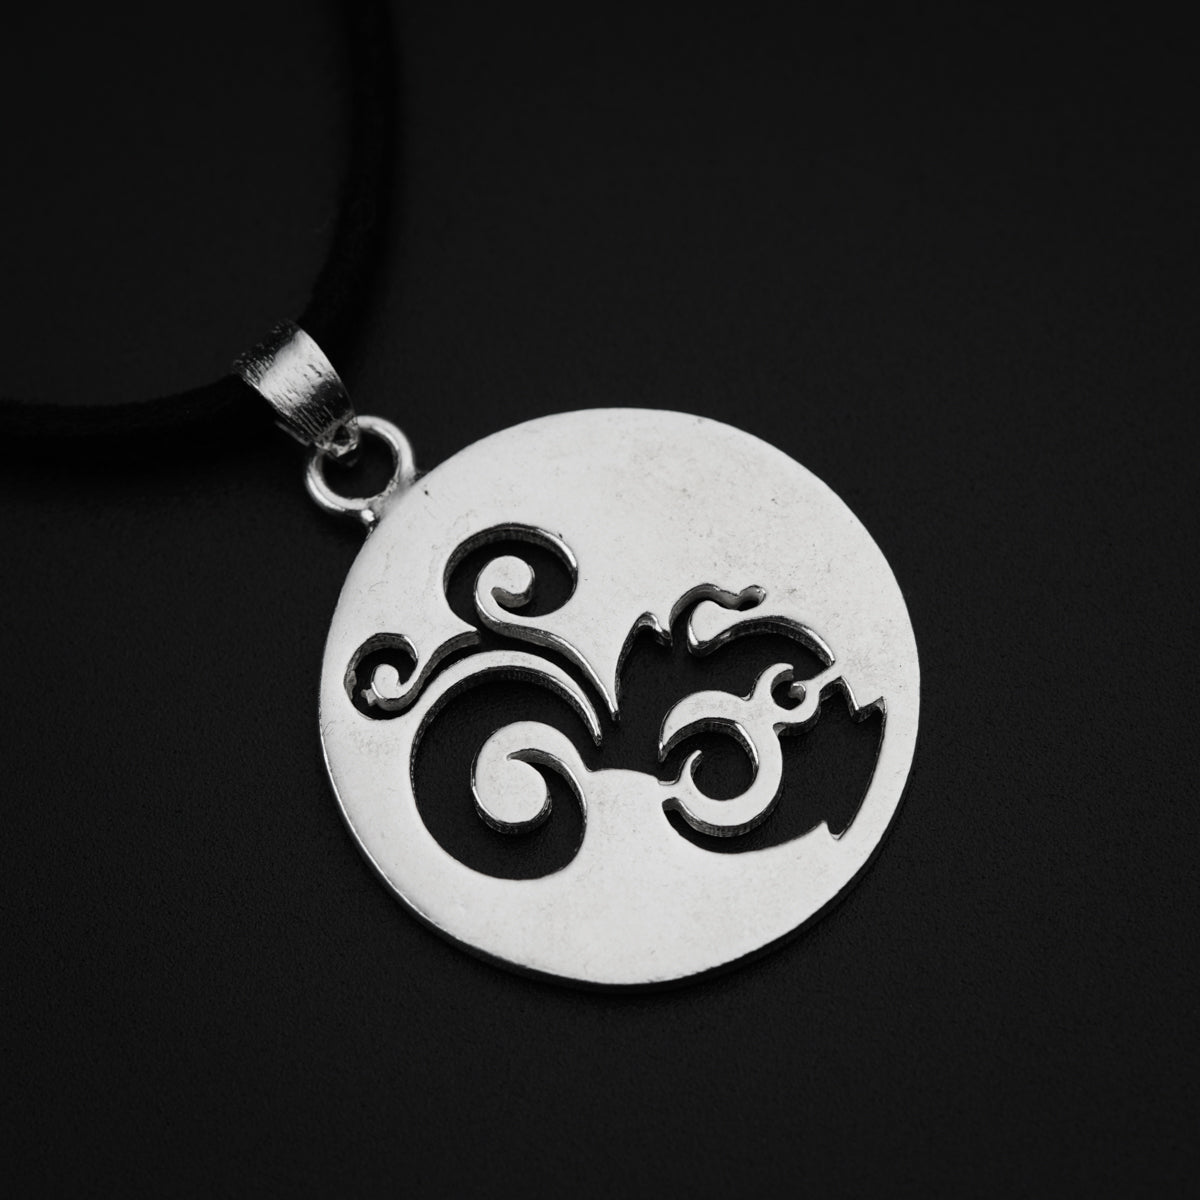 Stainless Steel Aquarius Charm Necklace Zodiac Sign Pendant Jewelry  Astrology Necklace for Men and Women - Walmart.com